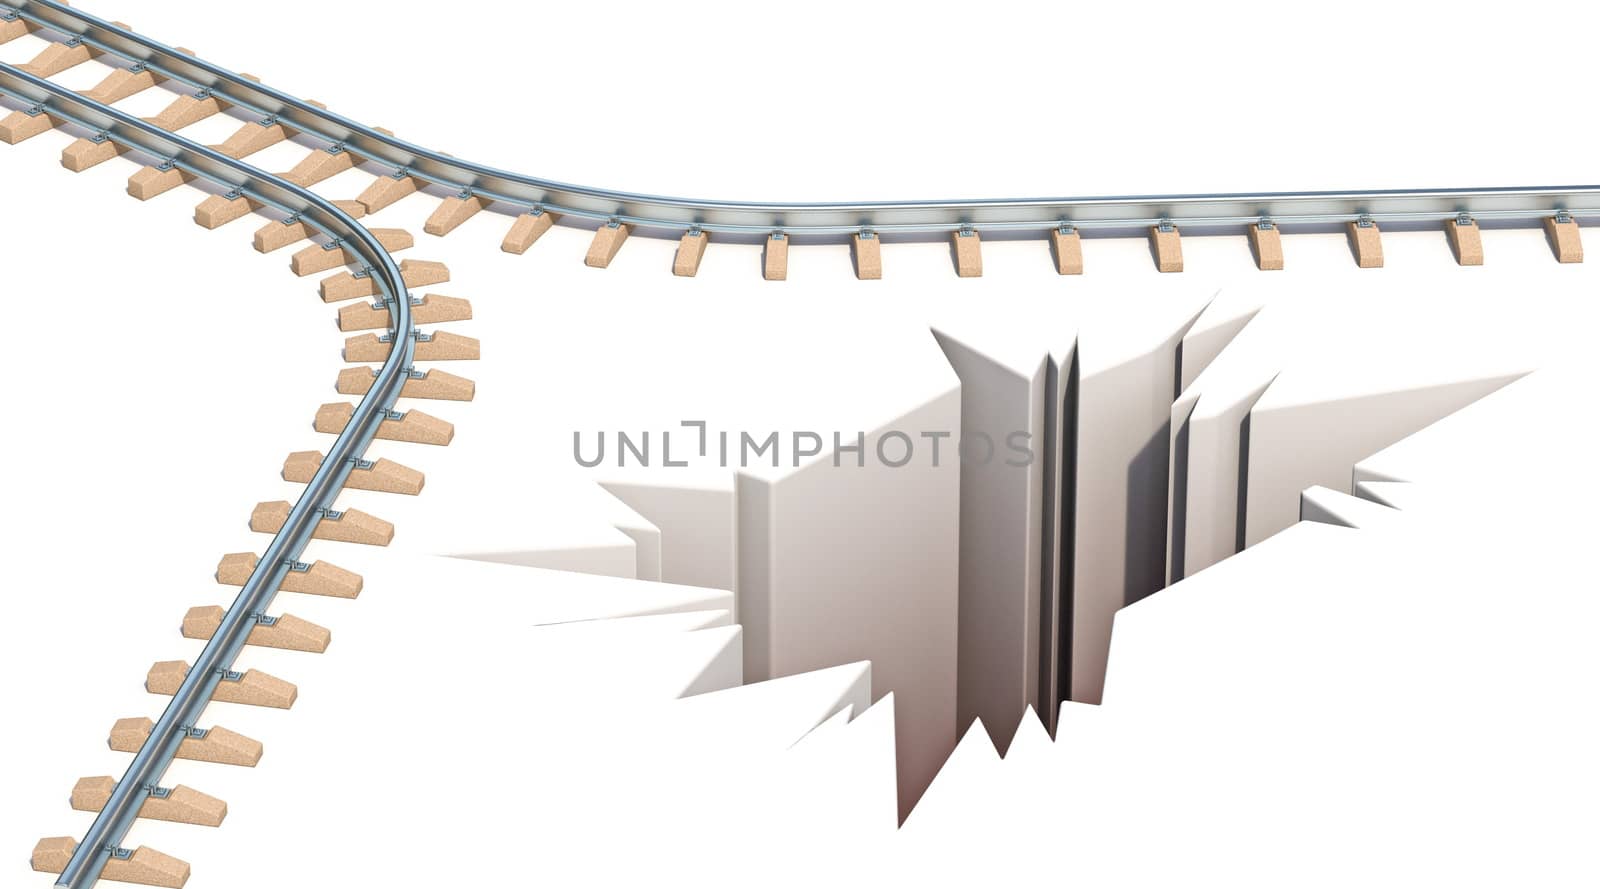 Railway escape hole 3D render illustration isolated on white background